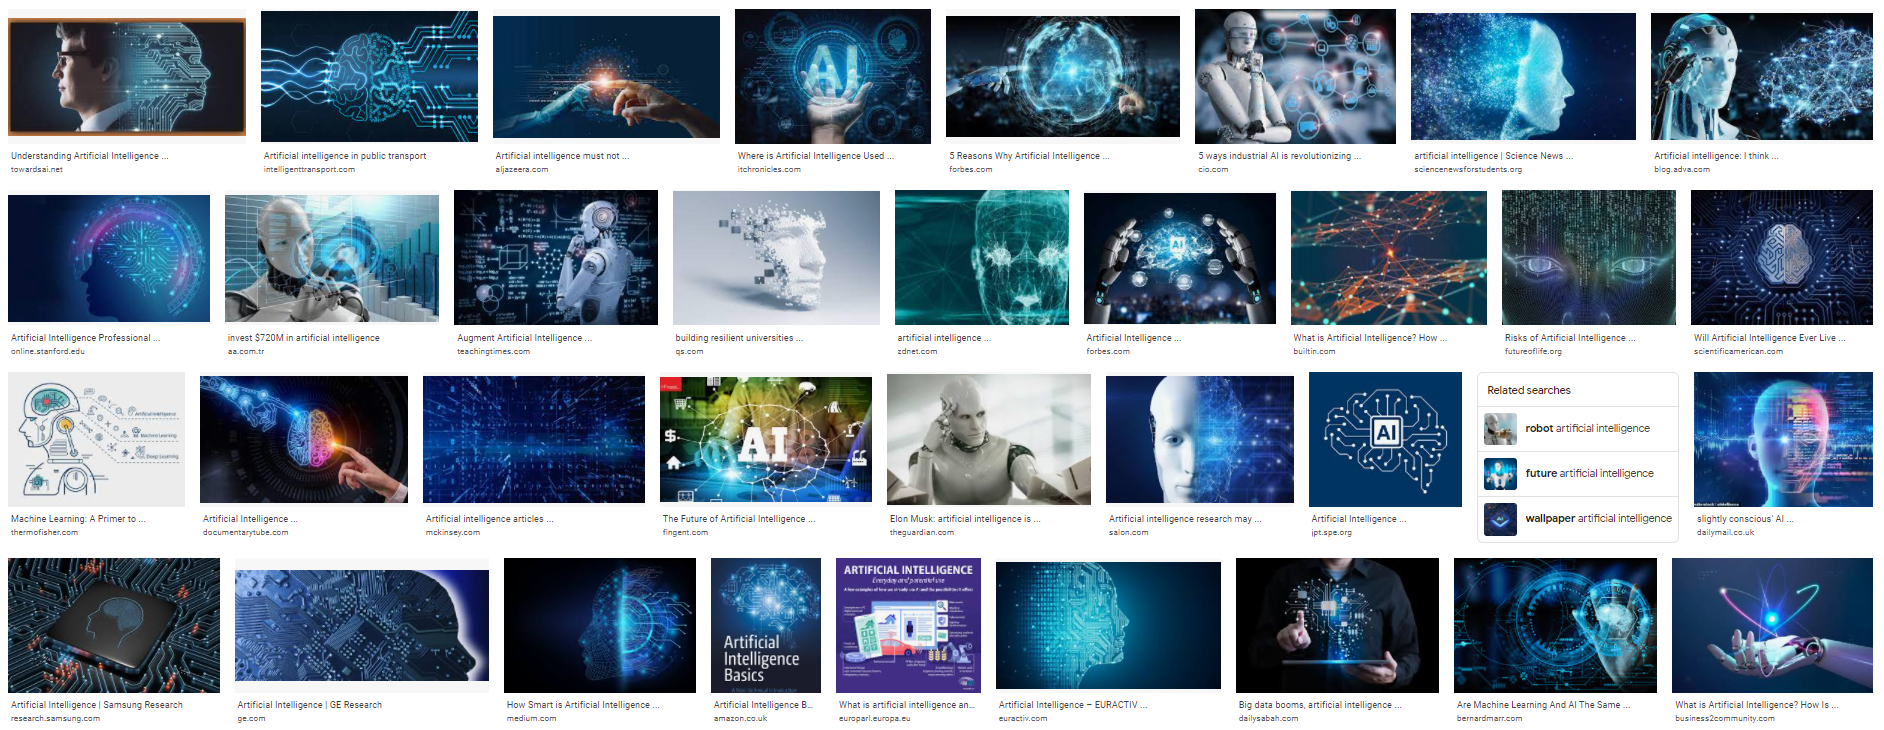 Screenshot of a Google image search for 'artificial intelligence'